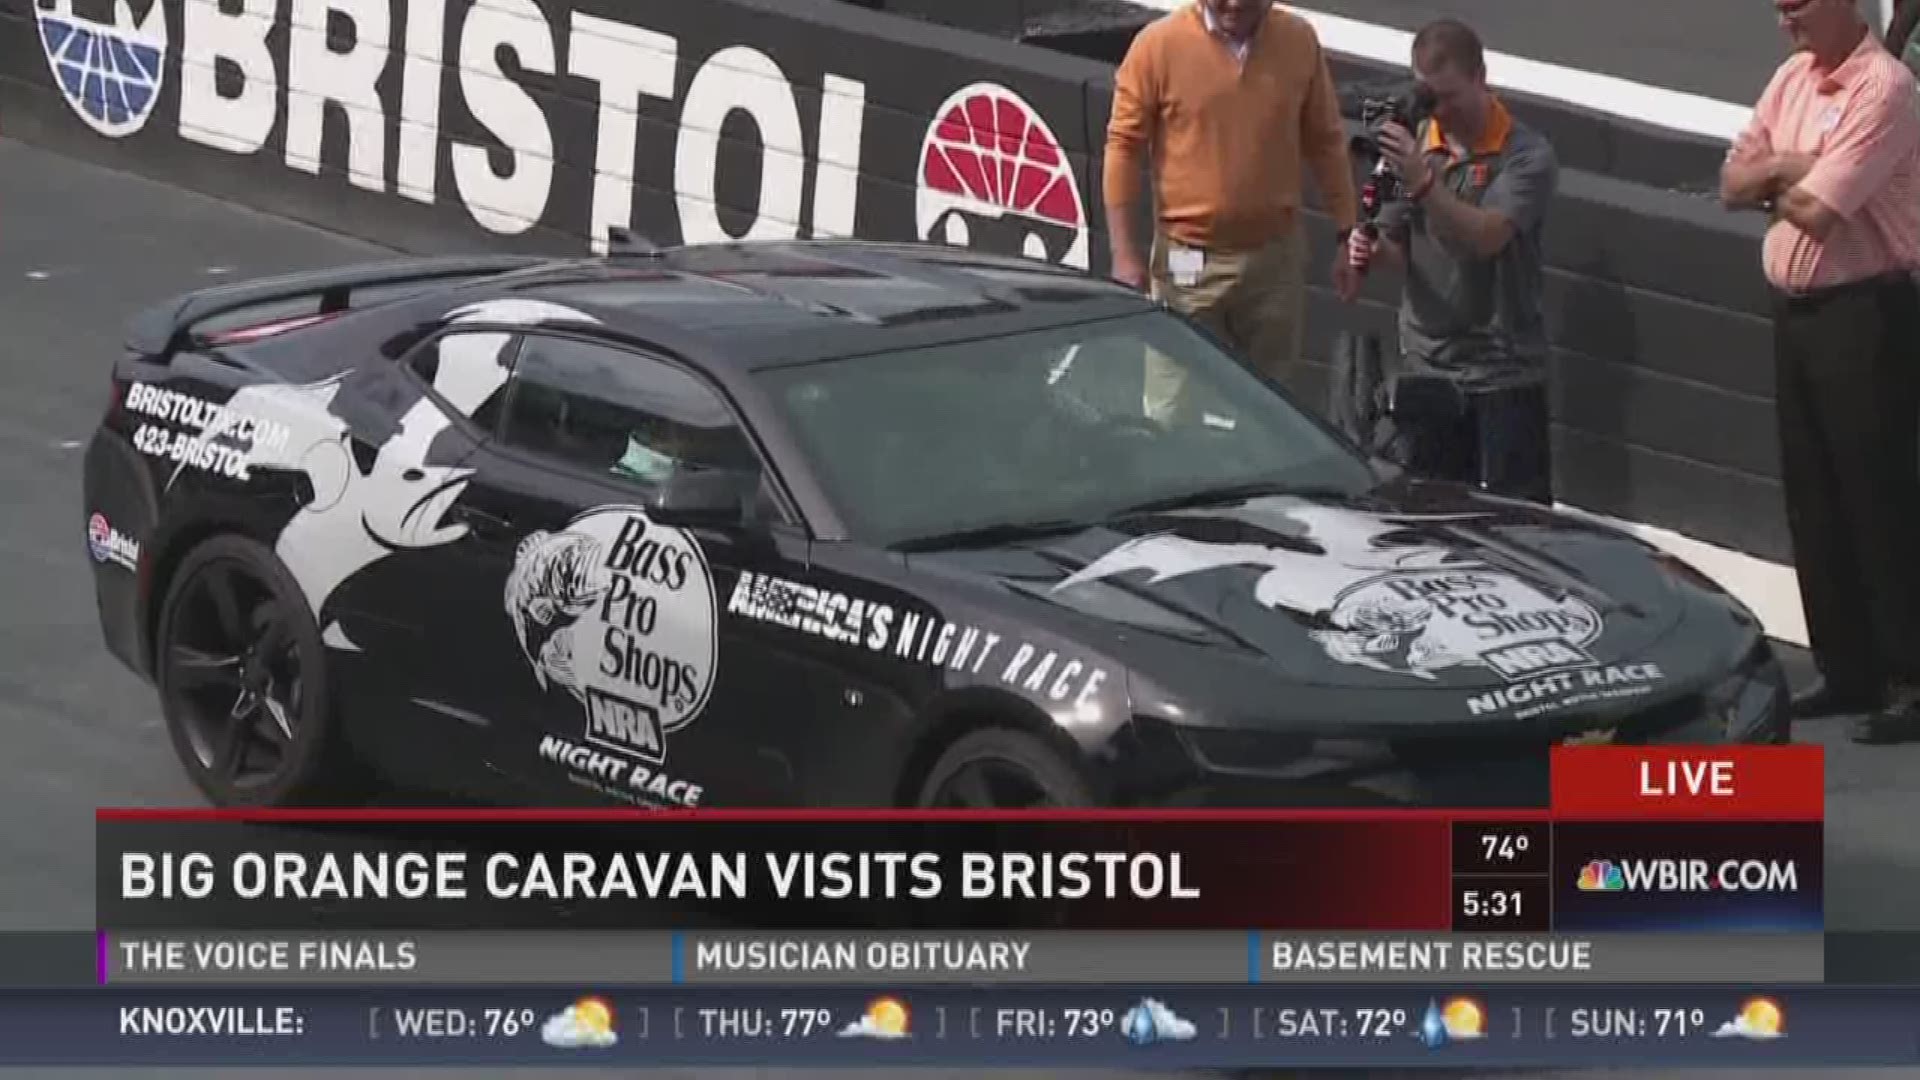 Rick Barnes jumped in the pace car at Bristol for a few laps before the Big Orange Caravan.